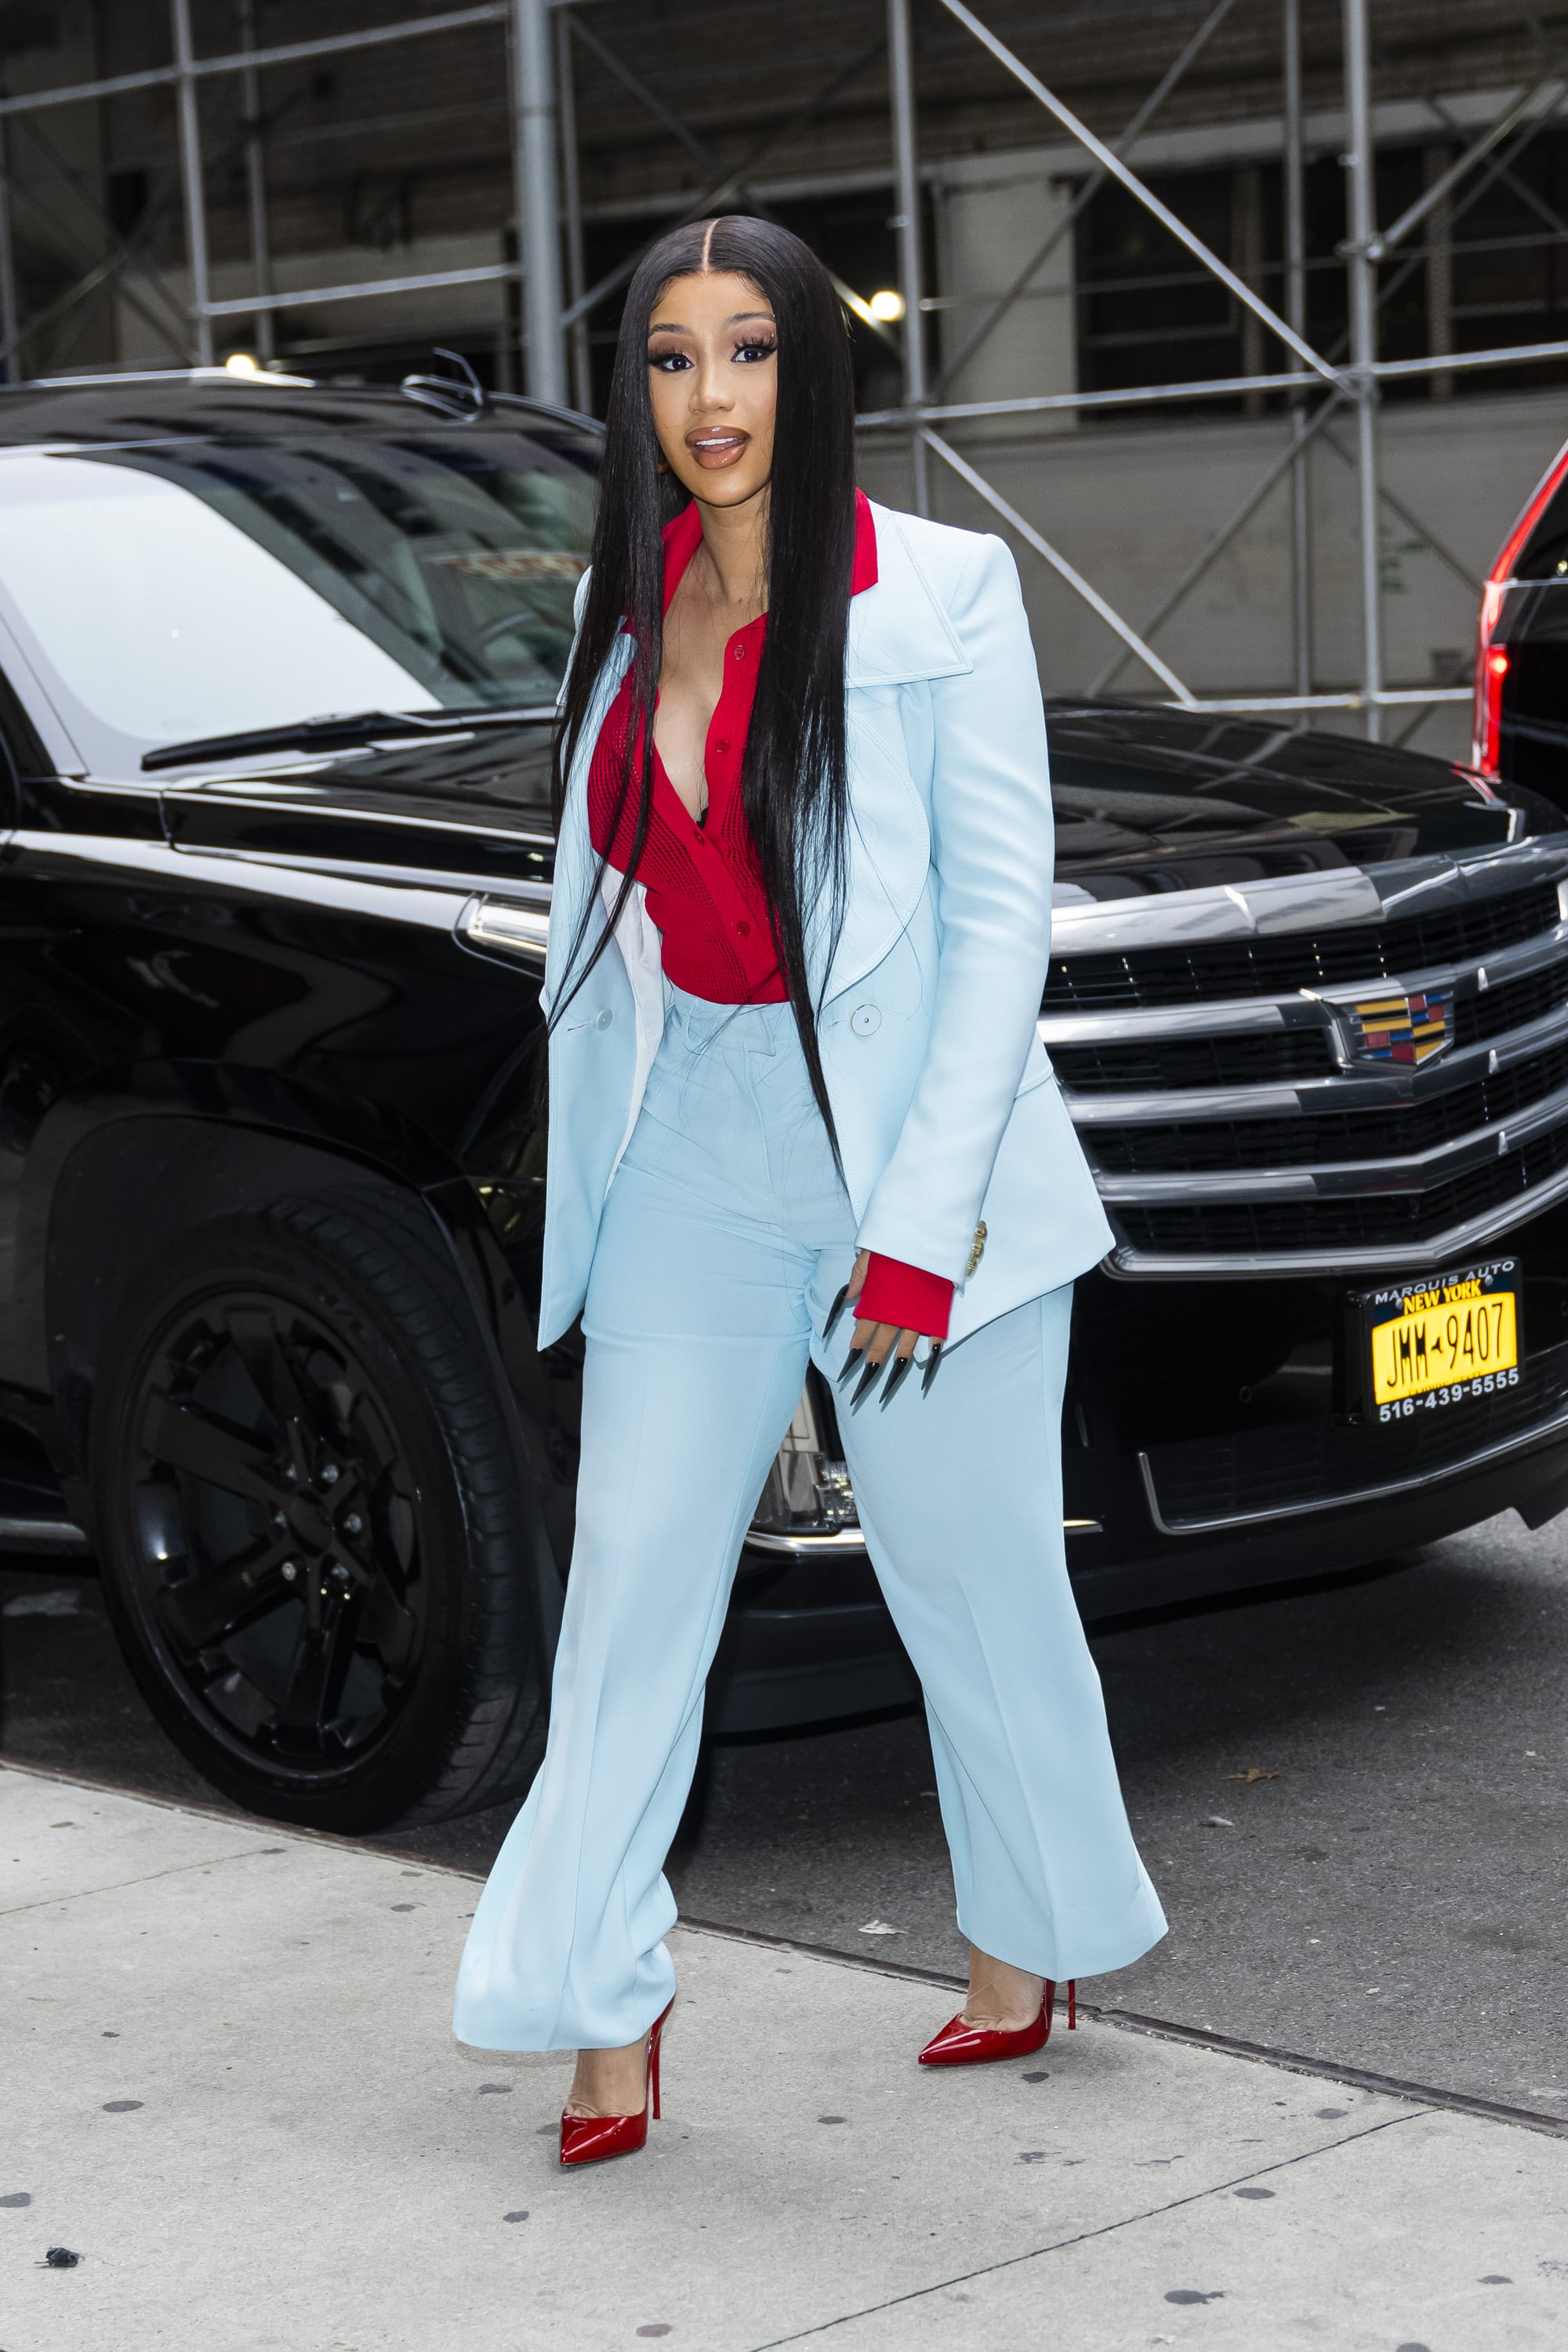 NEW YORK, NEW YORK - NOVEMBER 02: Cardi B is seen in Chelsea on November 02, 2021 in New York City. (Photo by Gotham/GC Images)